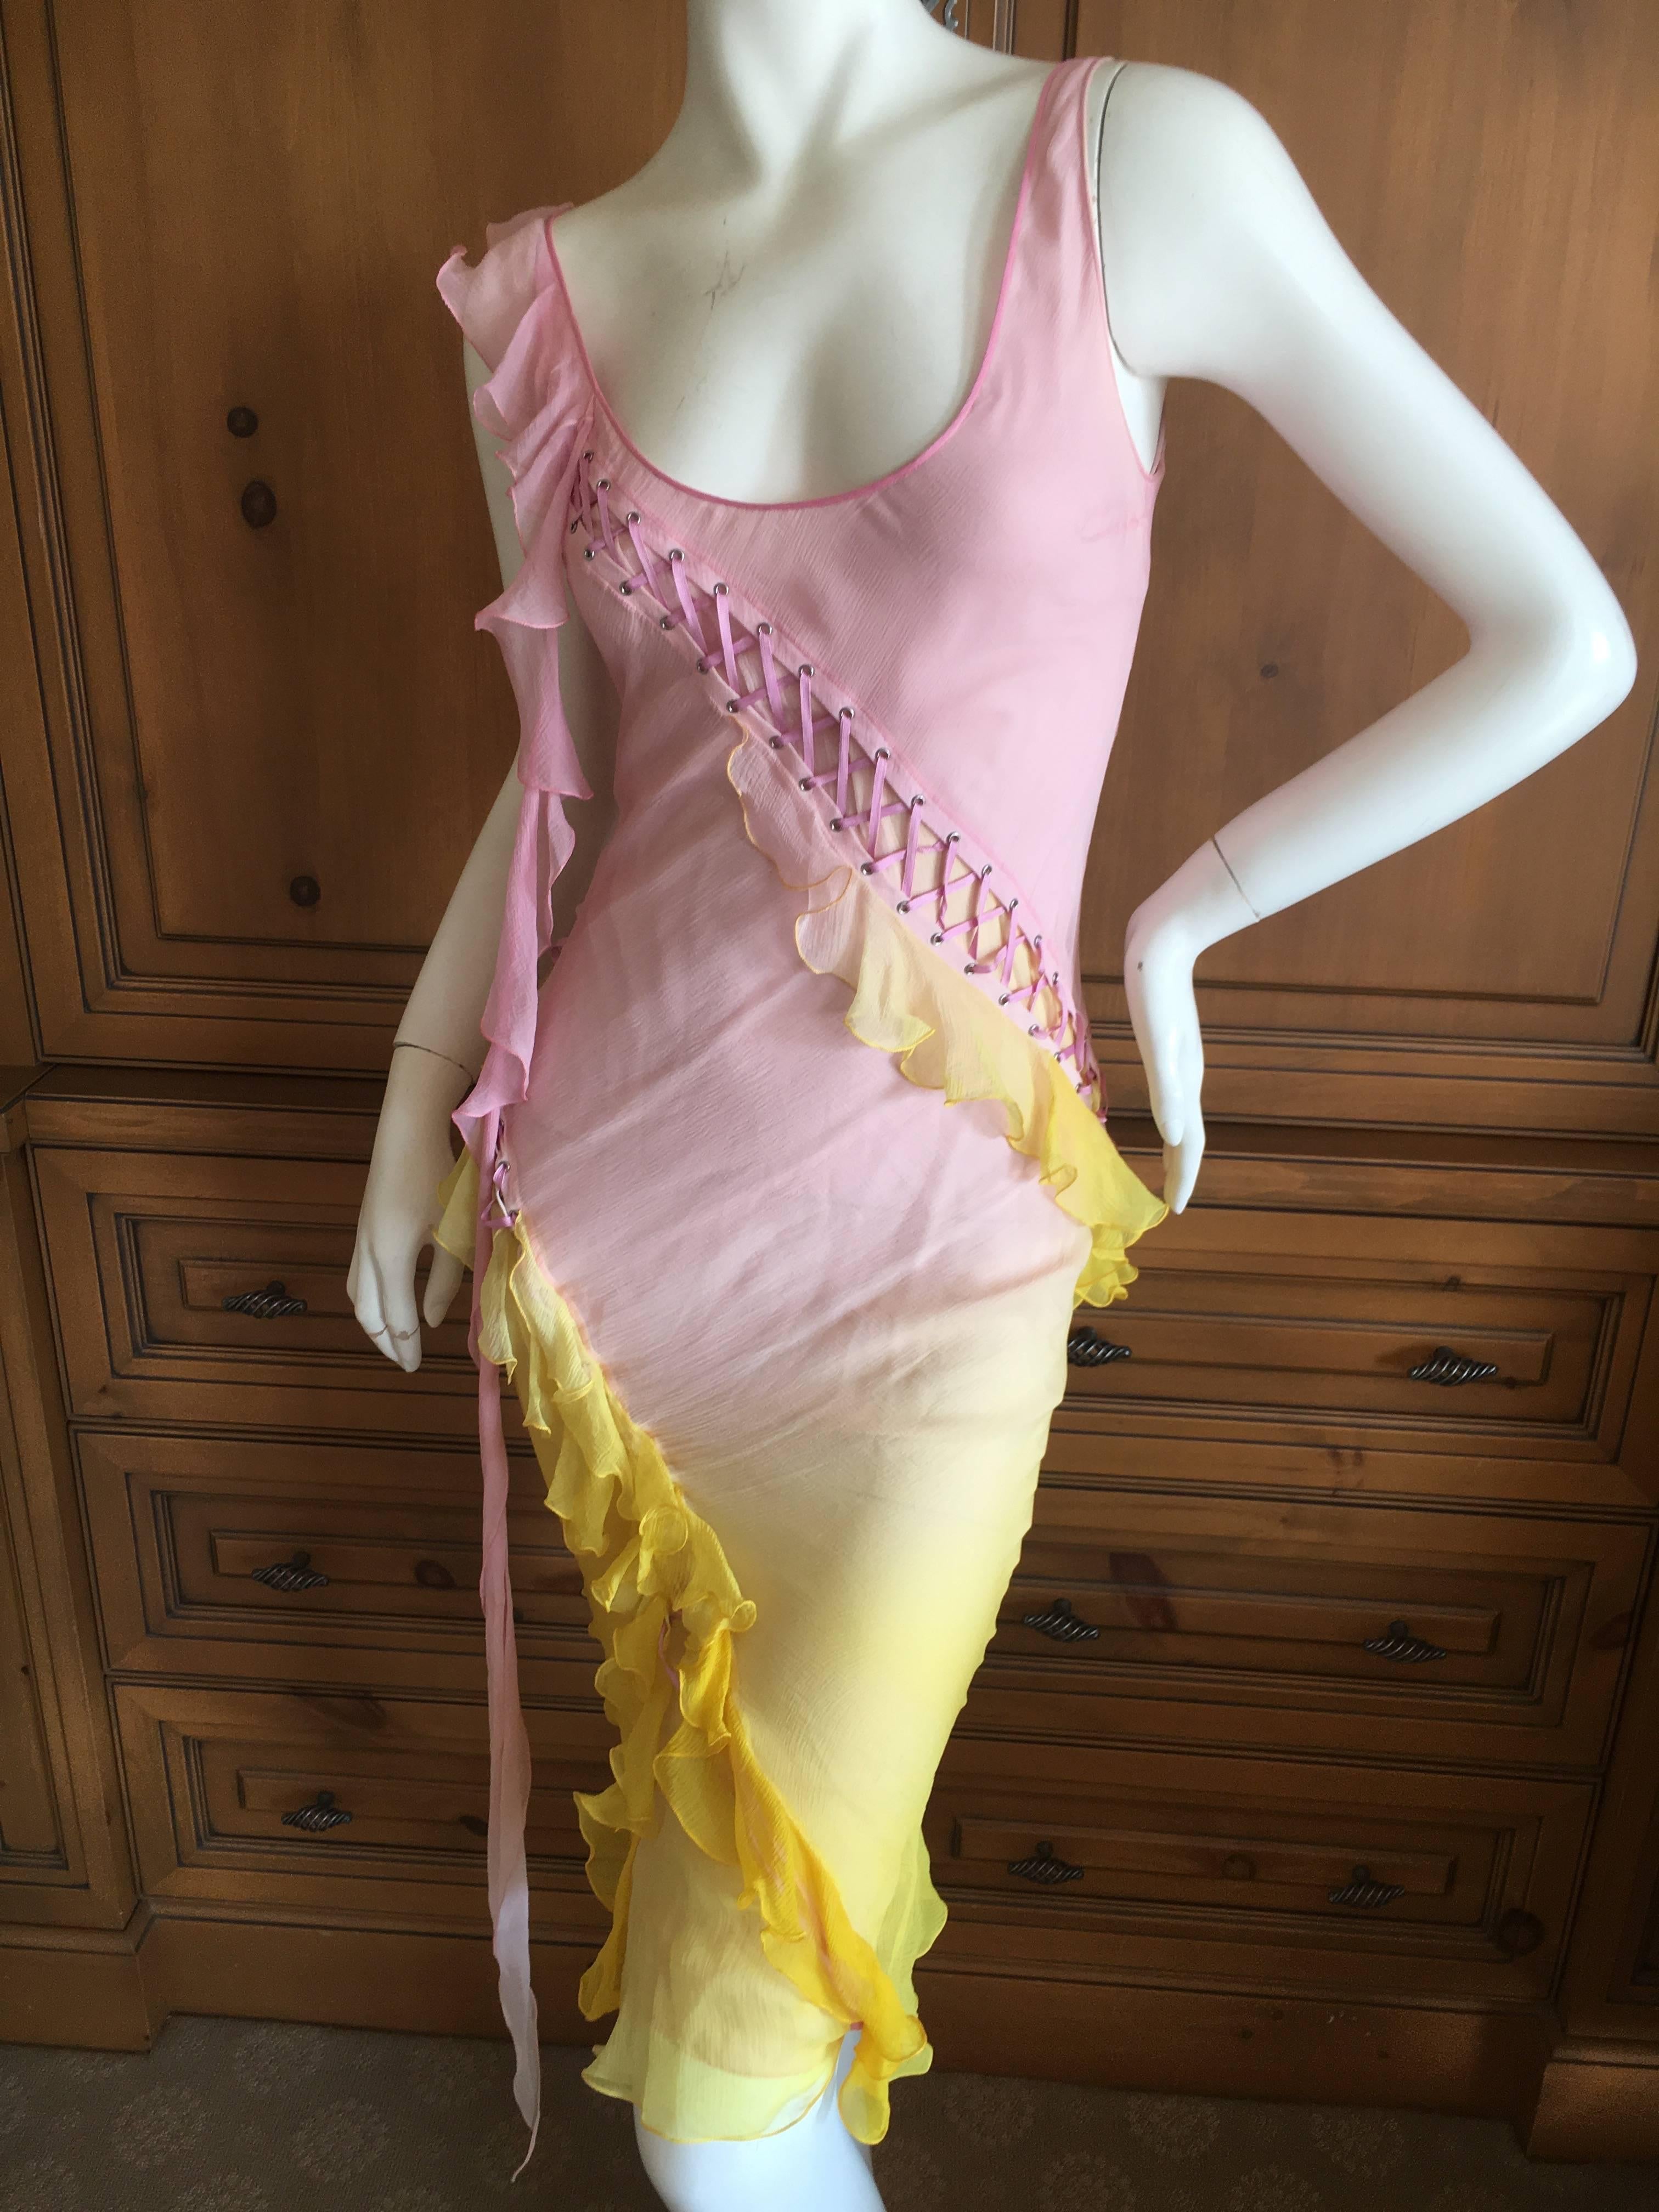 Christian Dior by John Galliano Corset Lace Bias Cut Ombre Silk Cocktail Dress.

Size 38

Bust 36"

 Waist 28" 

 Hips 39"

 Length 42"

Excellent condition 

